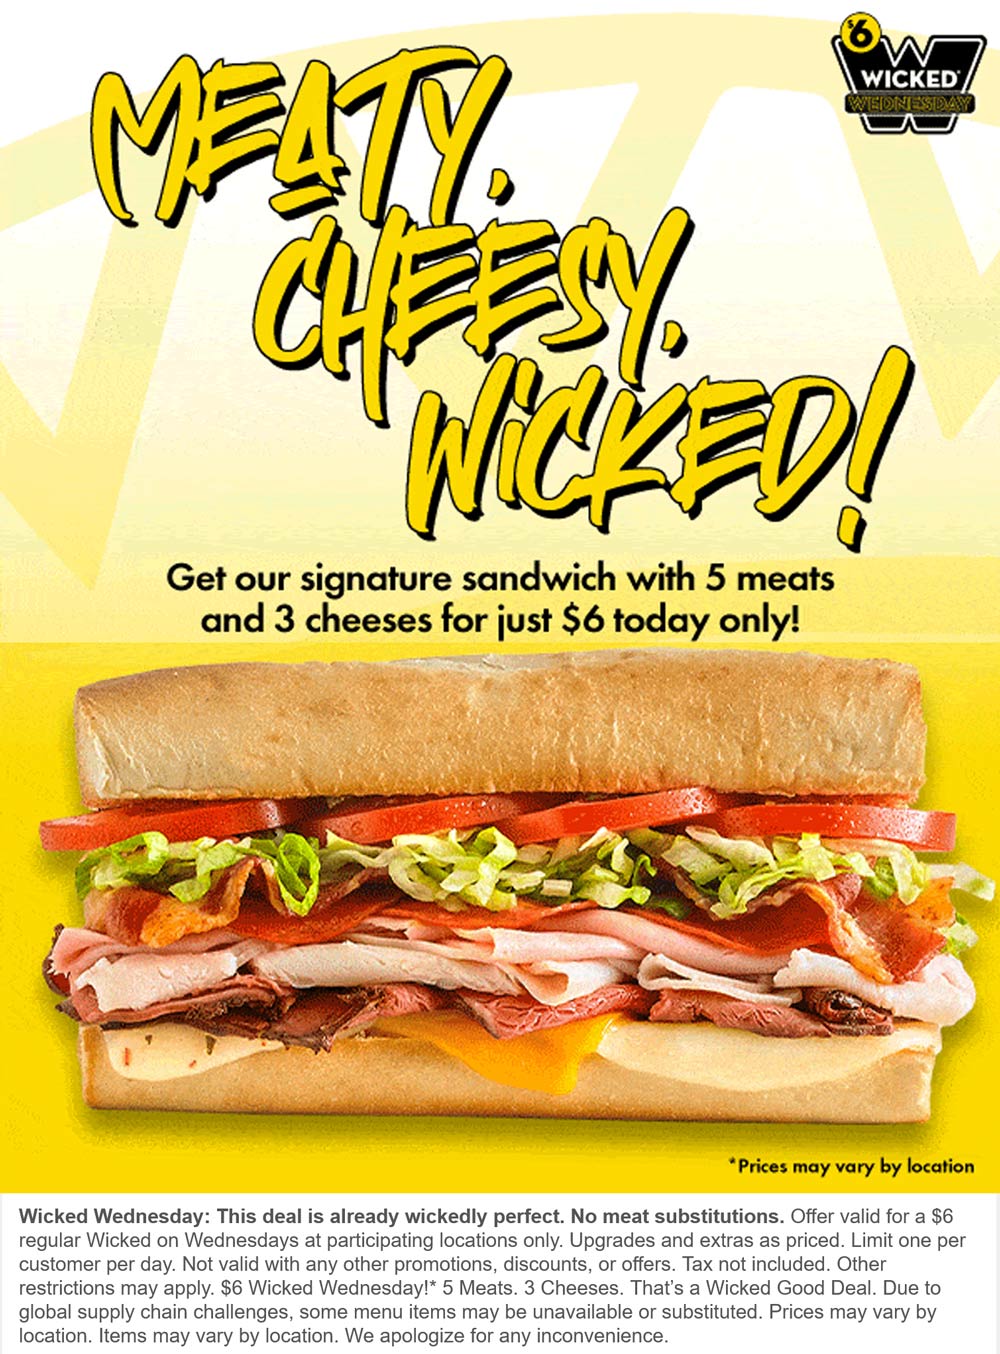 Which Wich restaurants Coupon  Wicked 5 meat, 3 cheese sandwich for $6 today at Which Wich #whichwich 